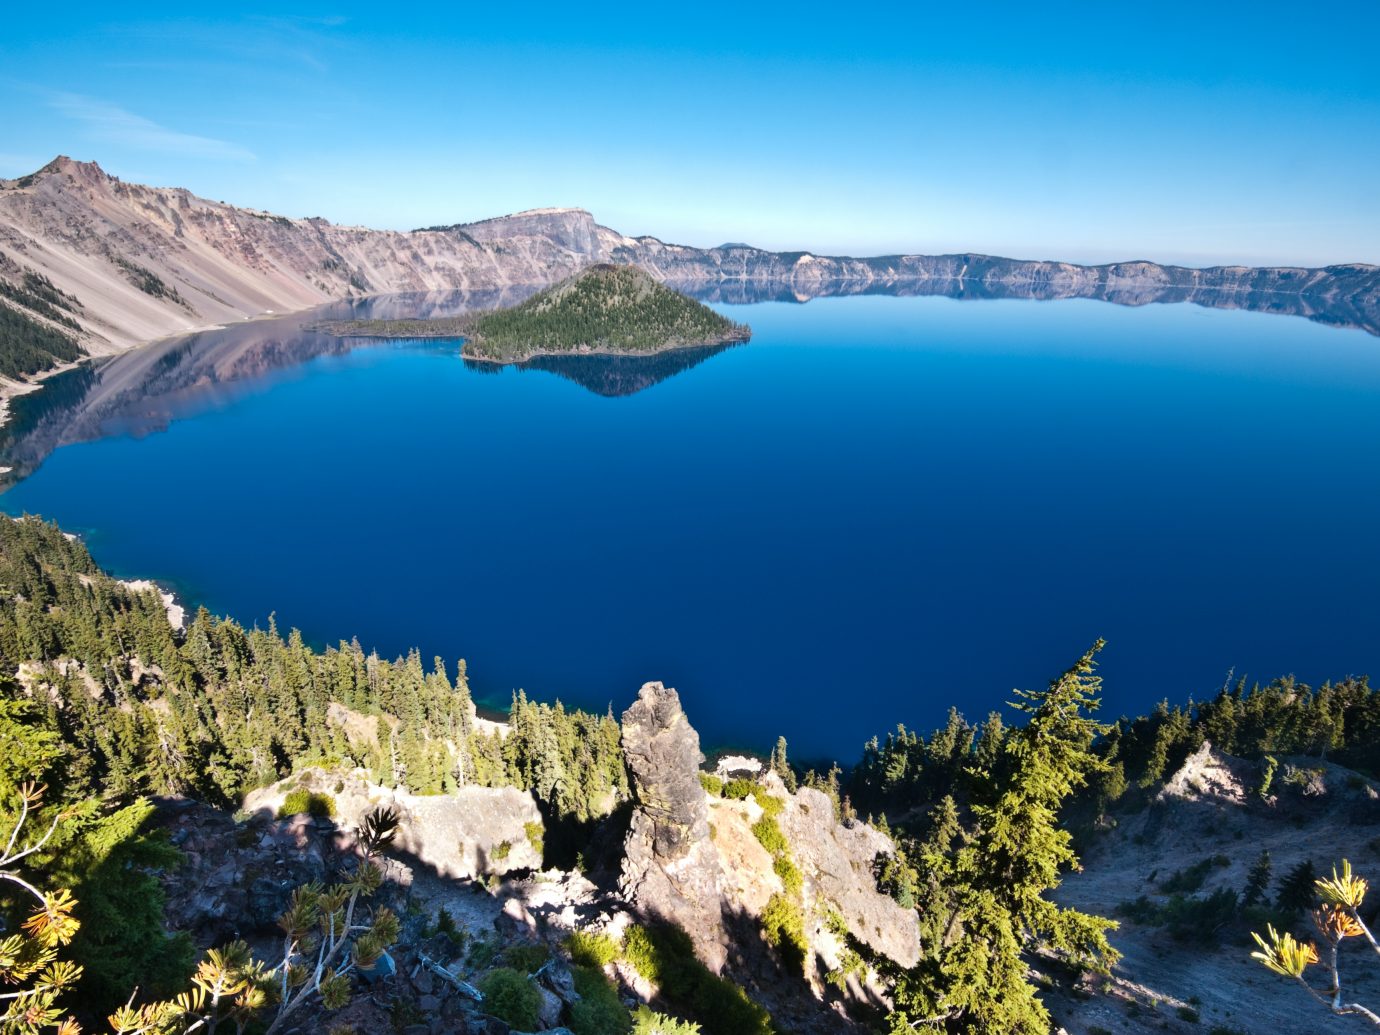 "Crater Lake and Wizard Island, Crater Lake National Park, Oregon"